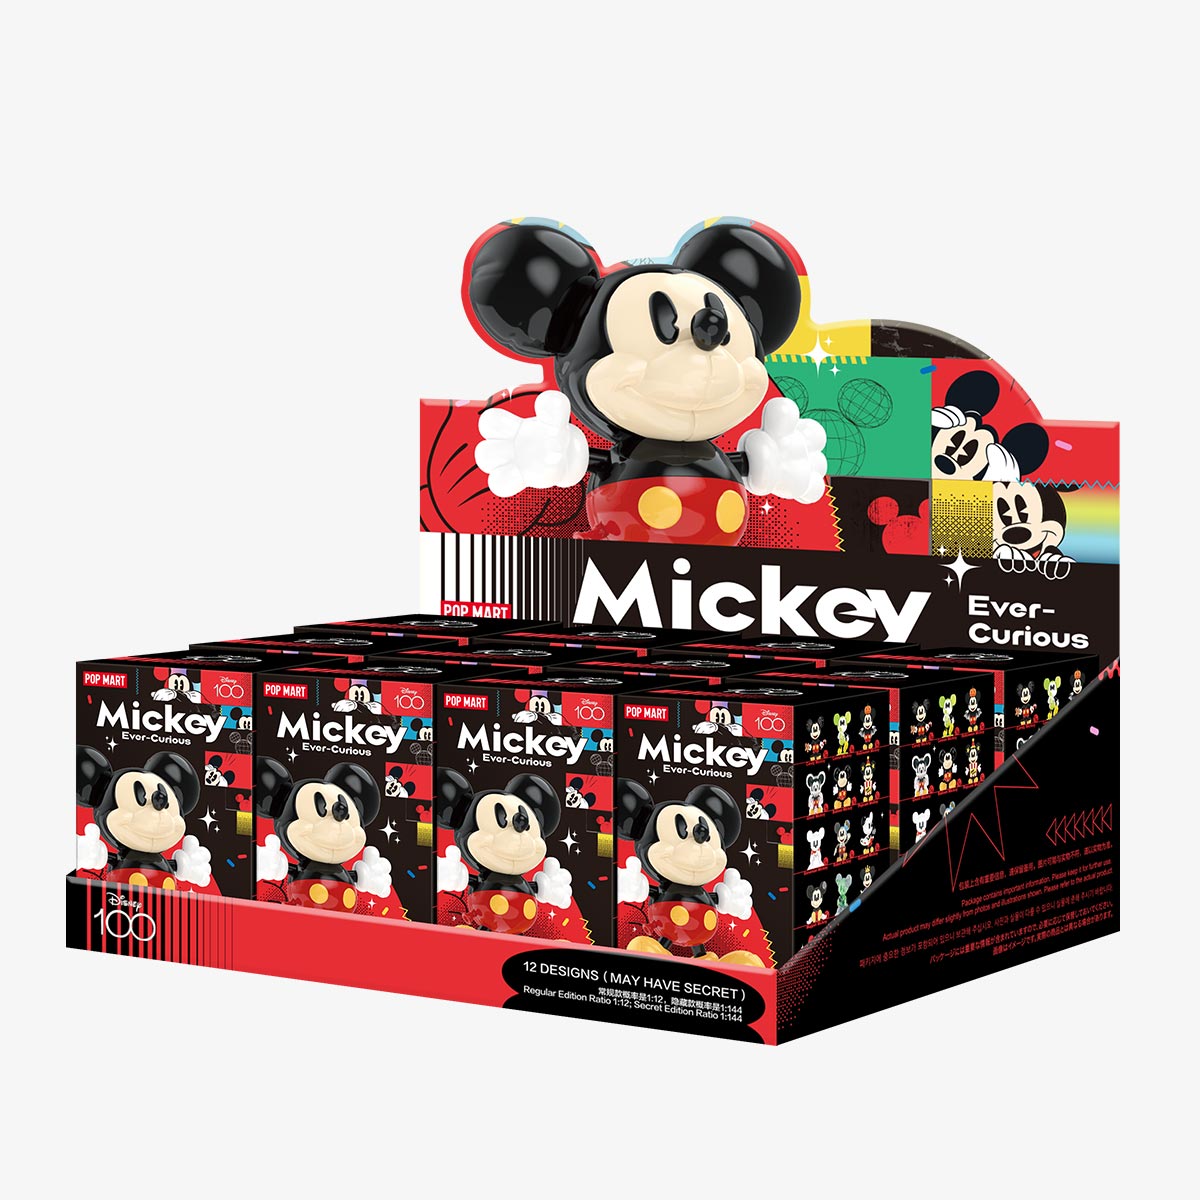 Disney 100th anniversary Mickey Ever-Curious Series Figures - POP 